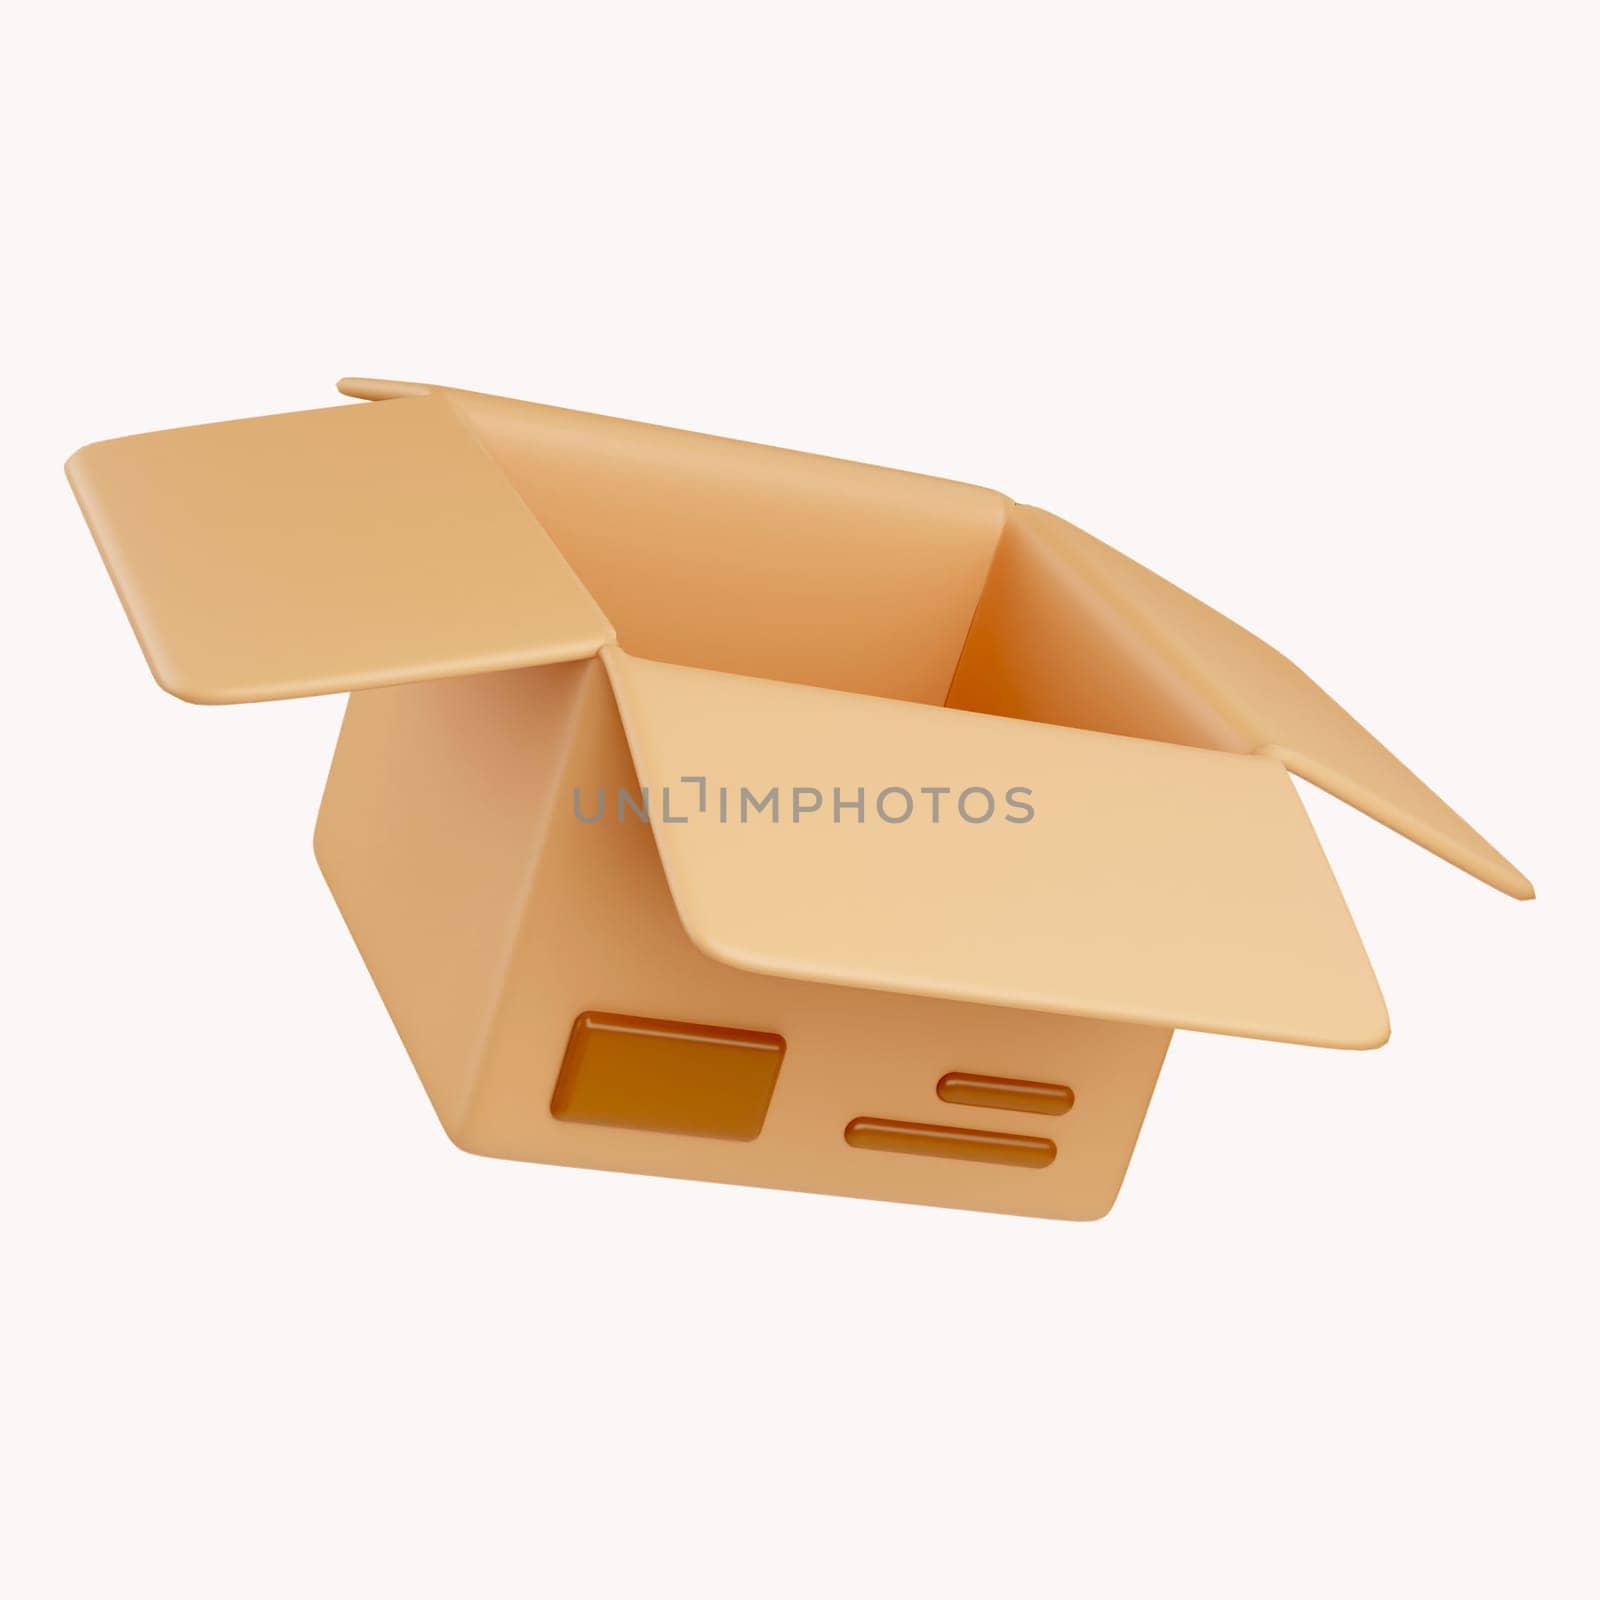 3D open cardboard box icon with white symbols isolated on white background. Render delivery cargo box 3d illustration.